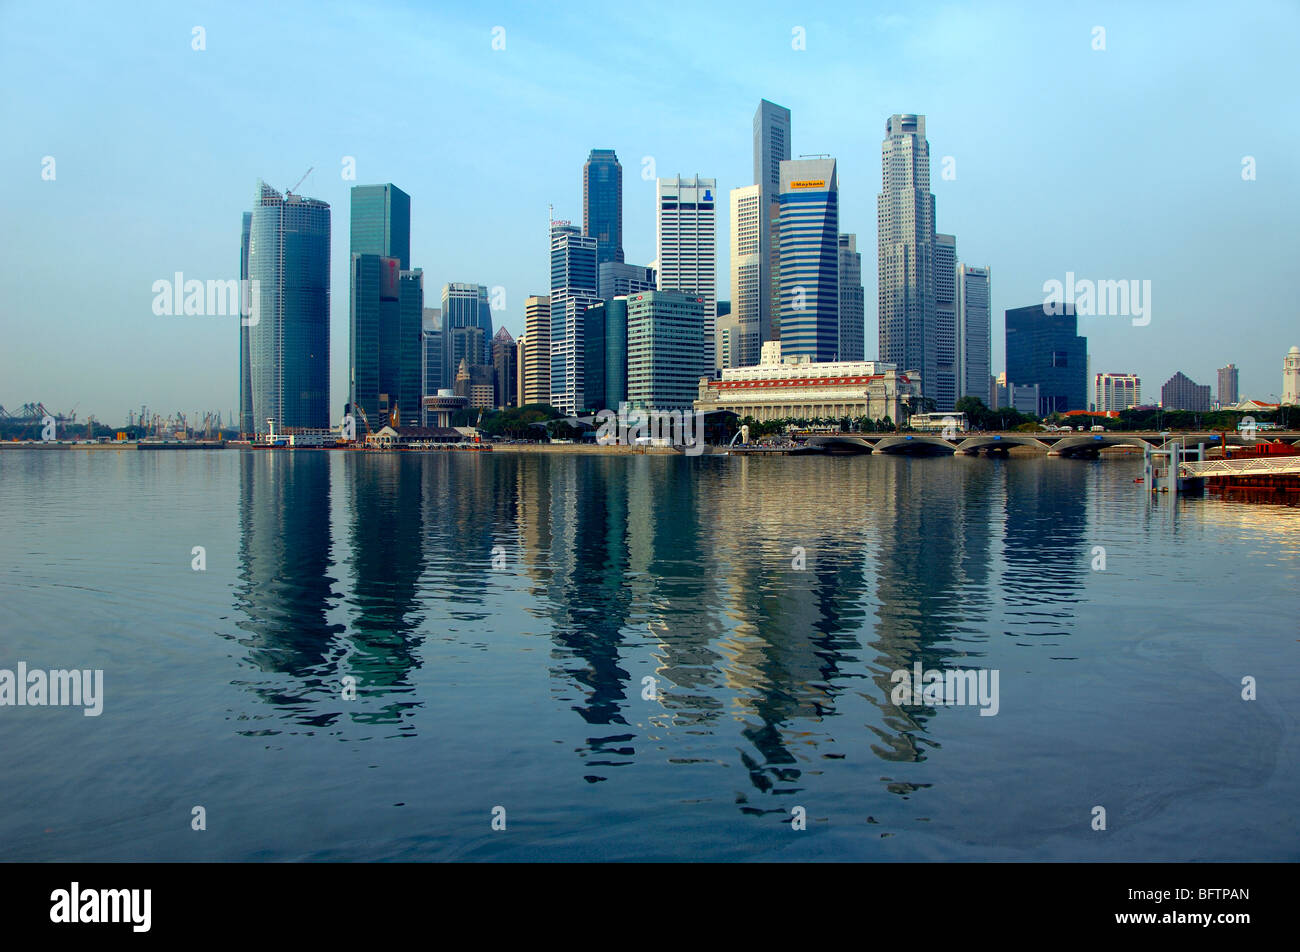 Skyline of Financial District with Reflected Office Tower Blocks or Skyscrapers Across Singapore Harbour or Harbor, Singapour Stock Photo